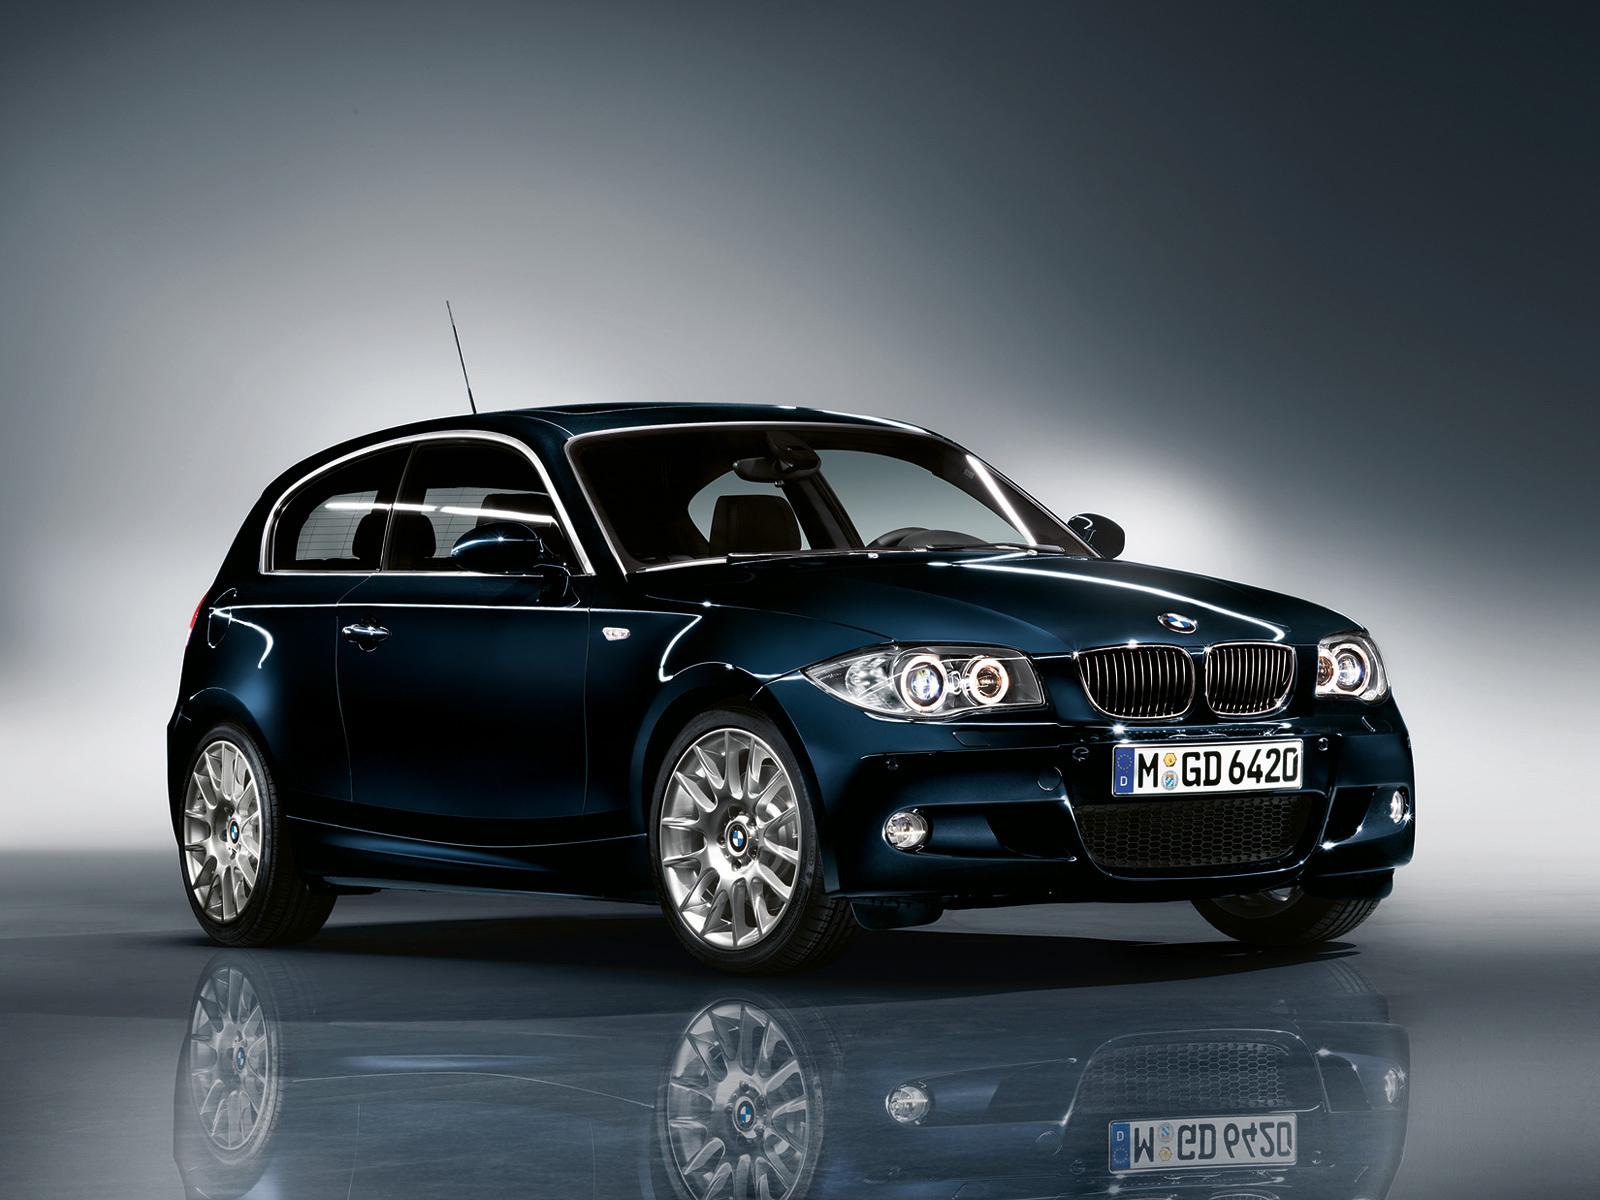 Bmw 1 Series Wallpapers